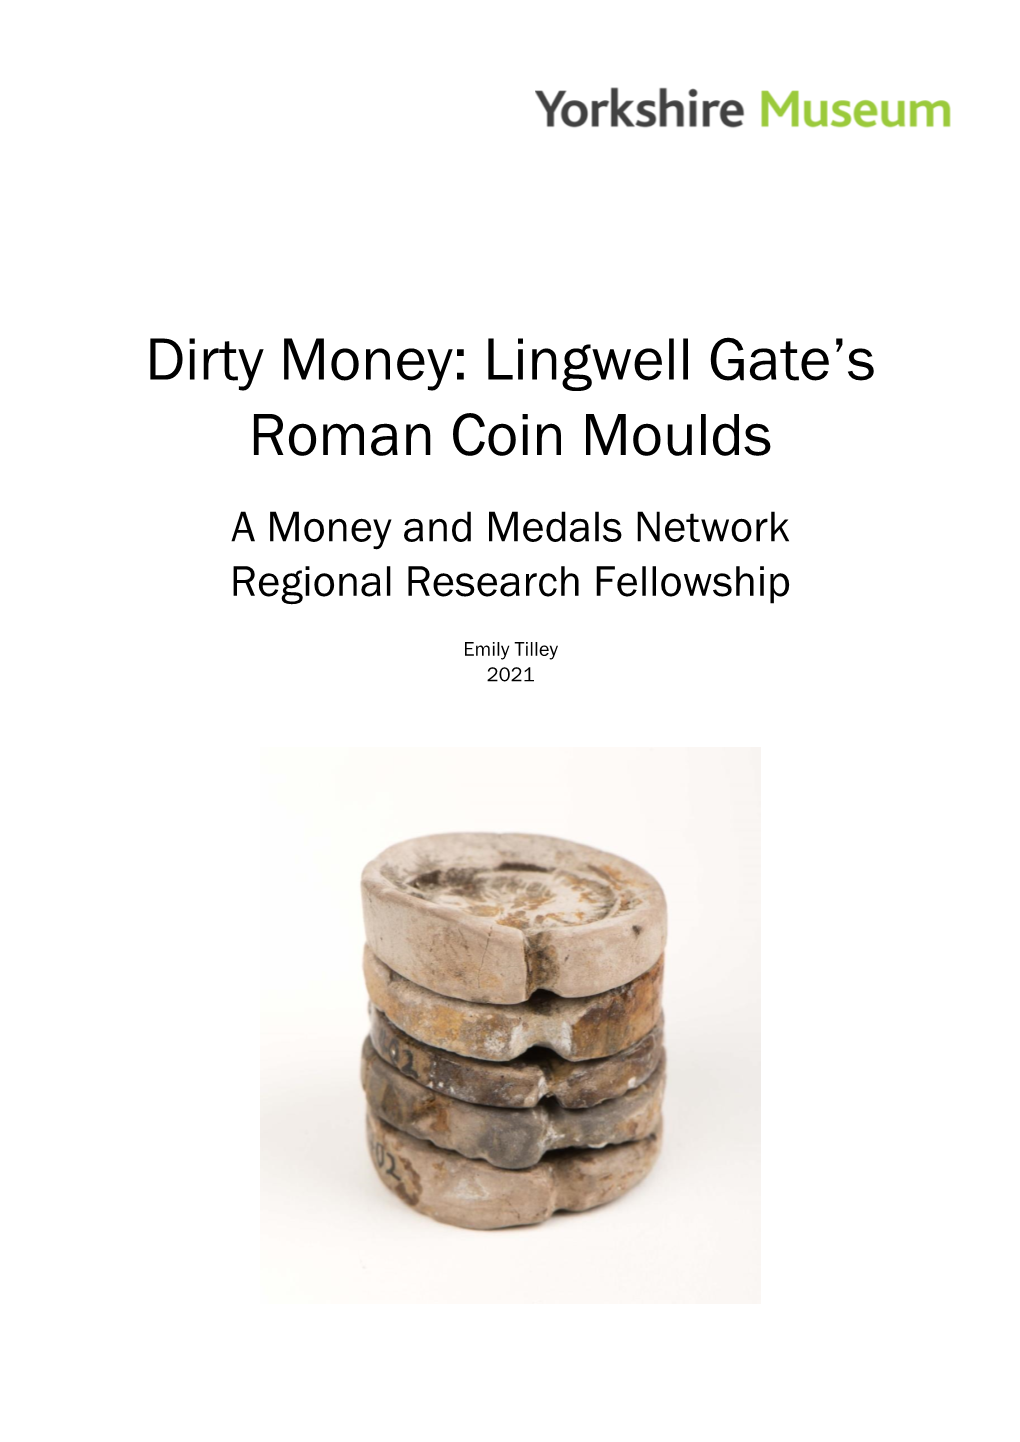 Dirty Money: Lingwell Gate's Roman Coin Moulds